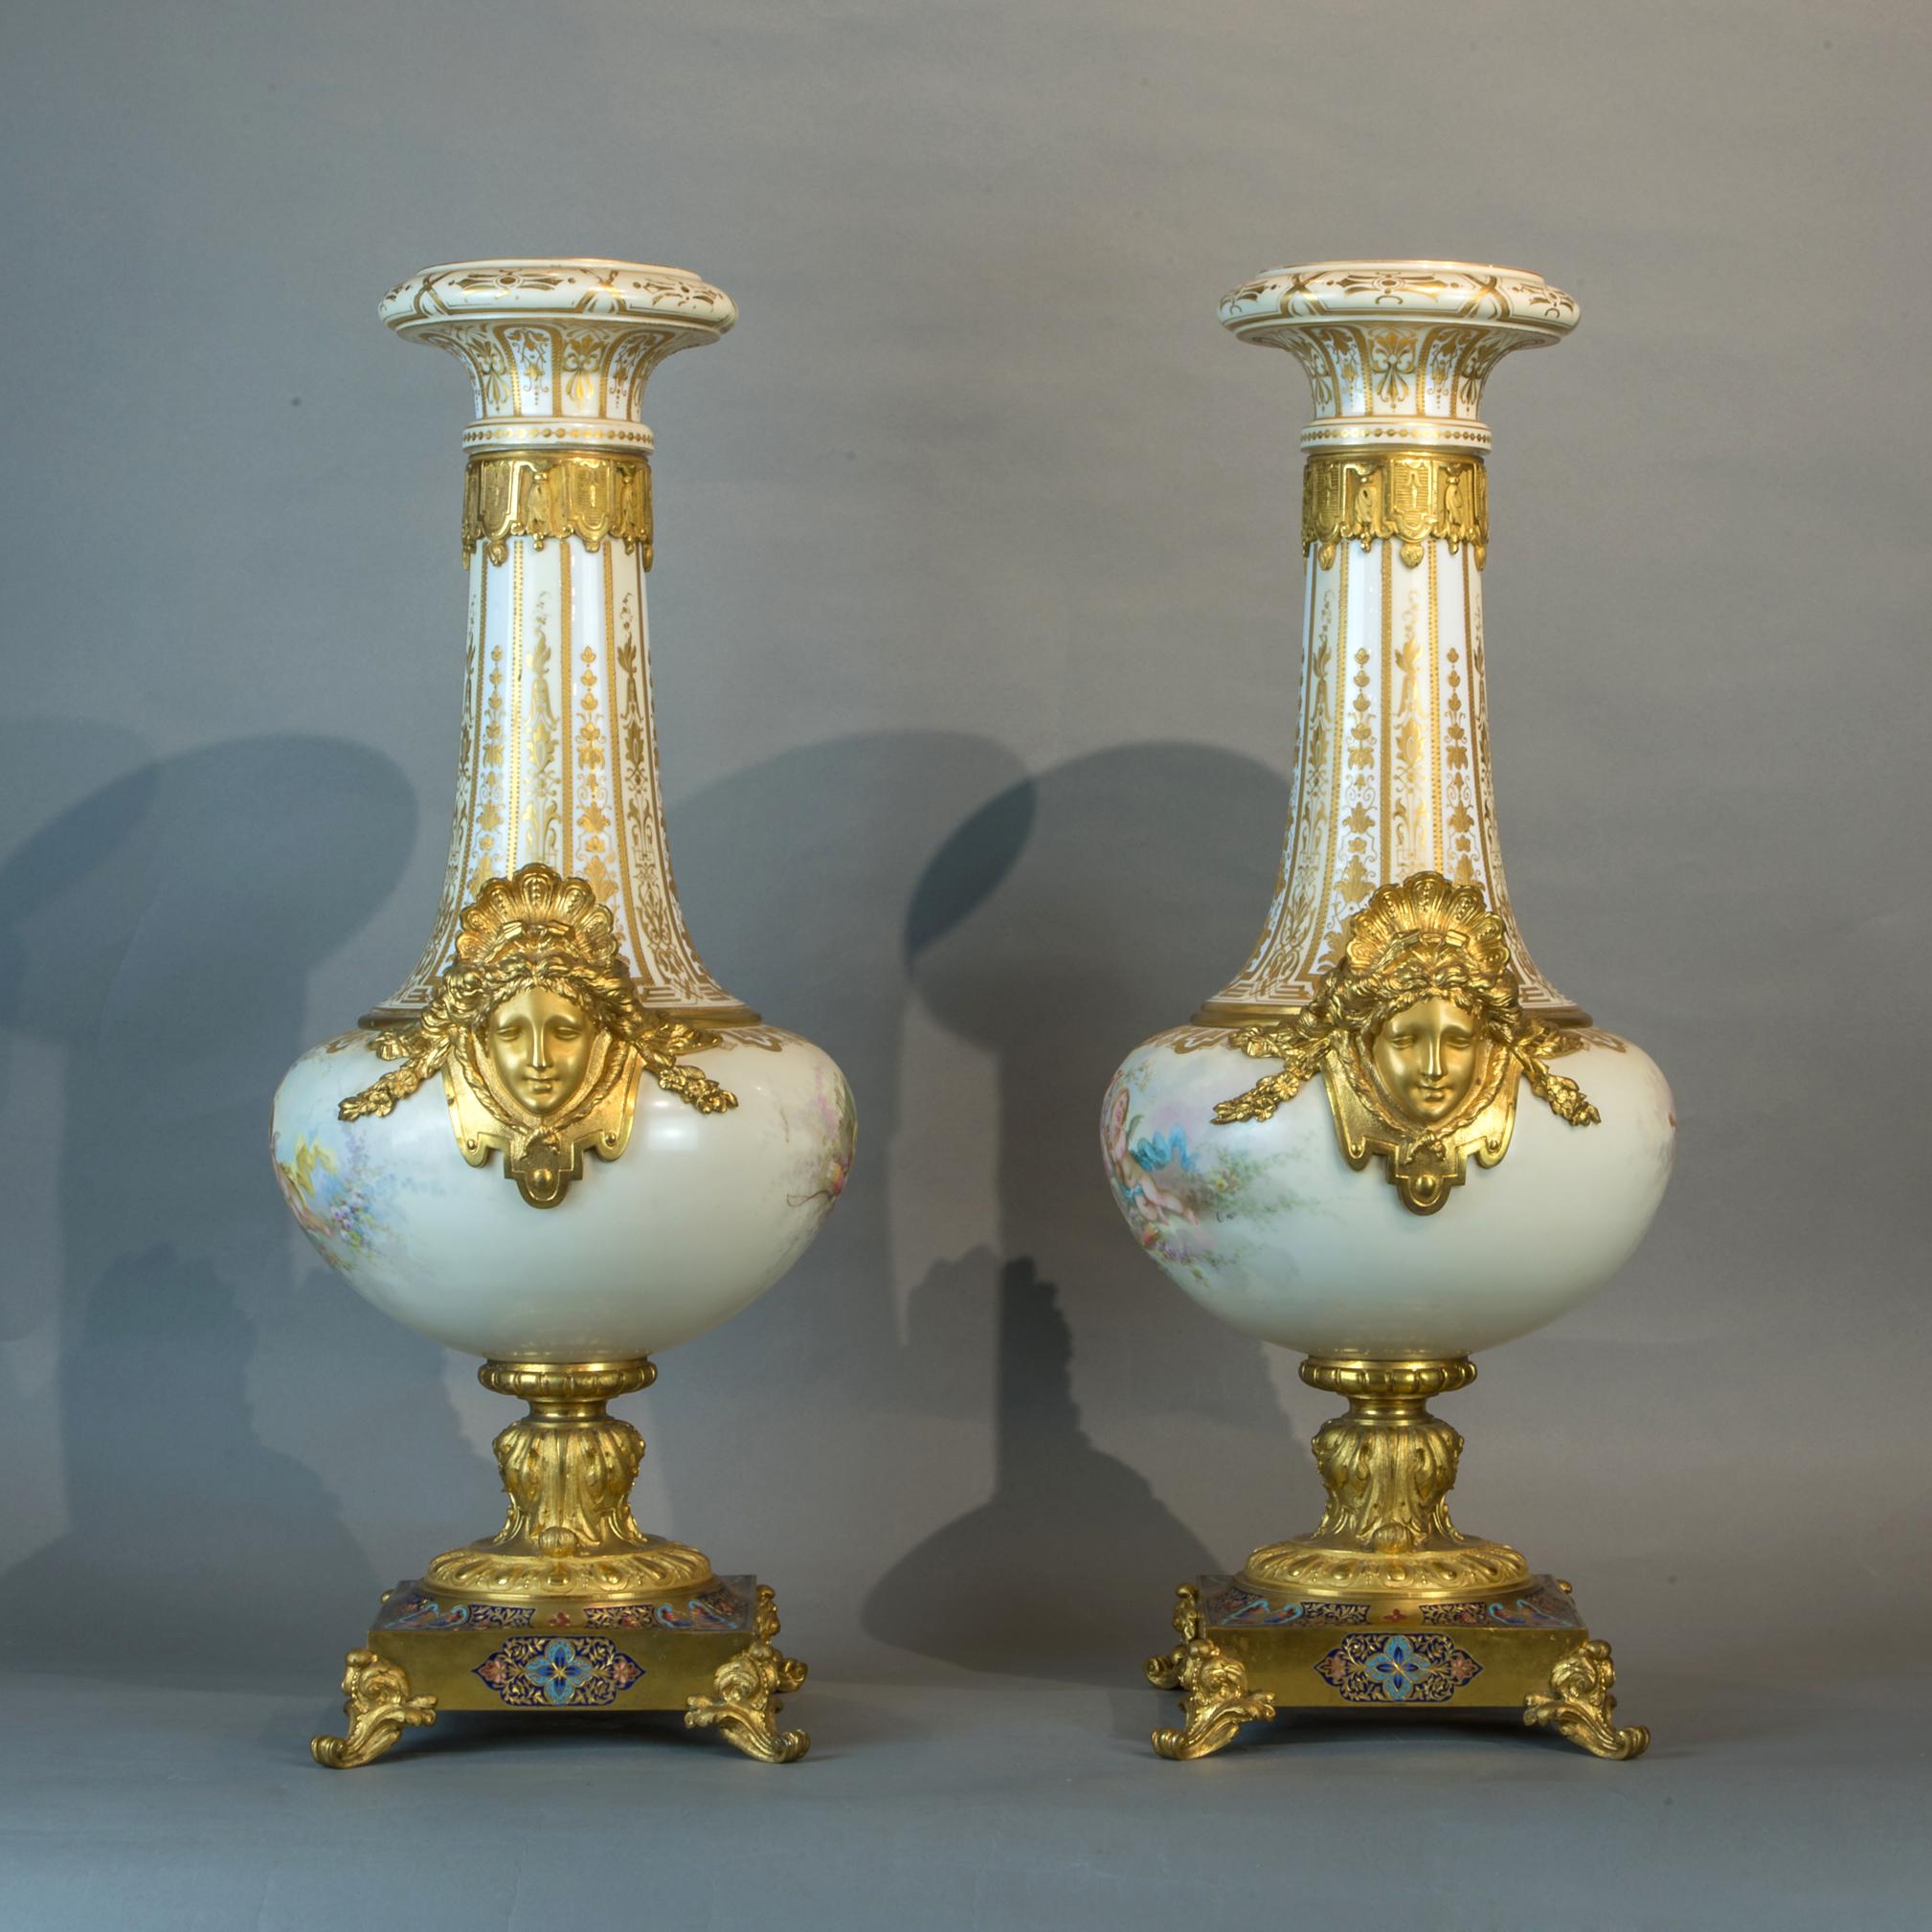 French Pair of Ormolu-Mounted Sèvres-style Porcelain Champlevé Vases For Sale